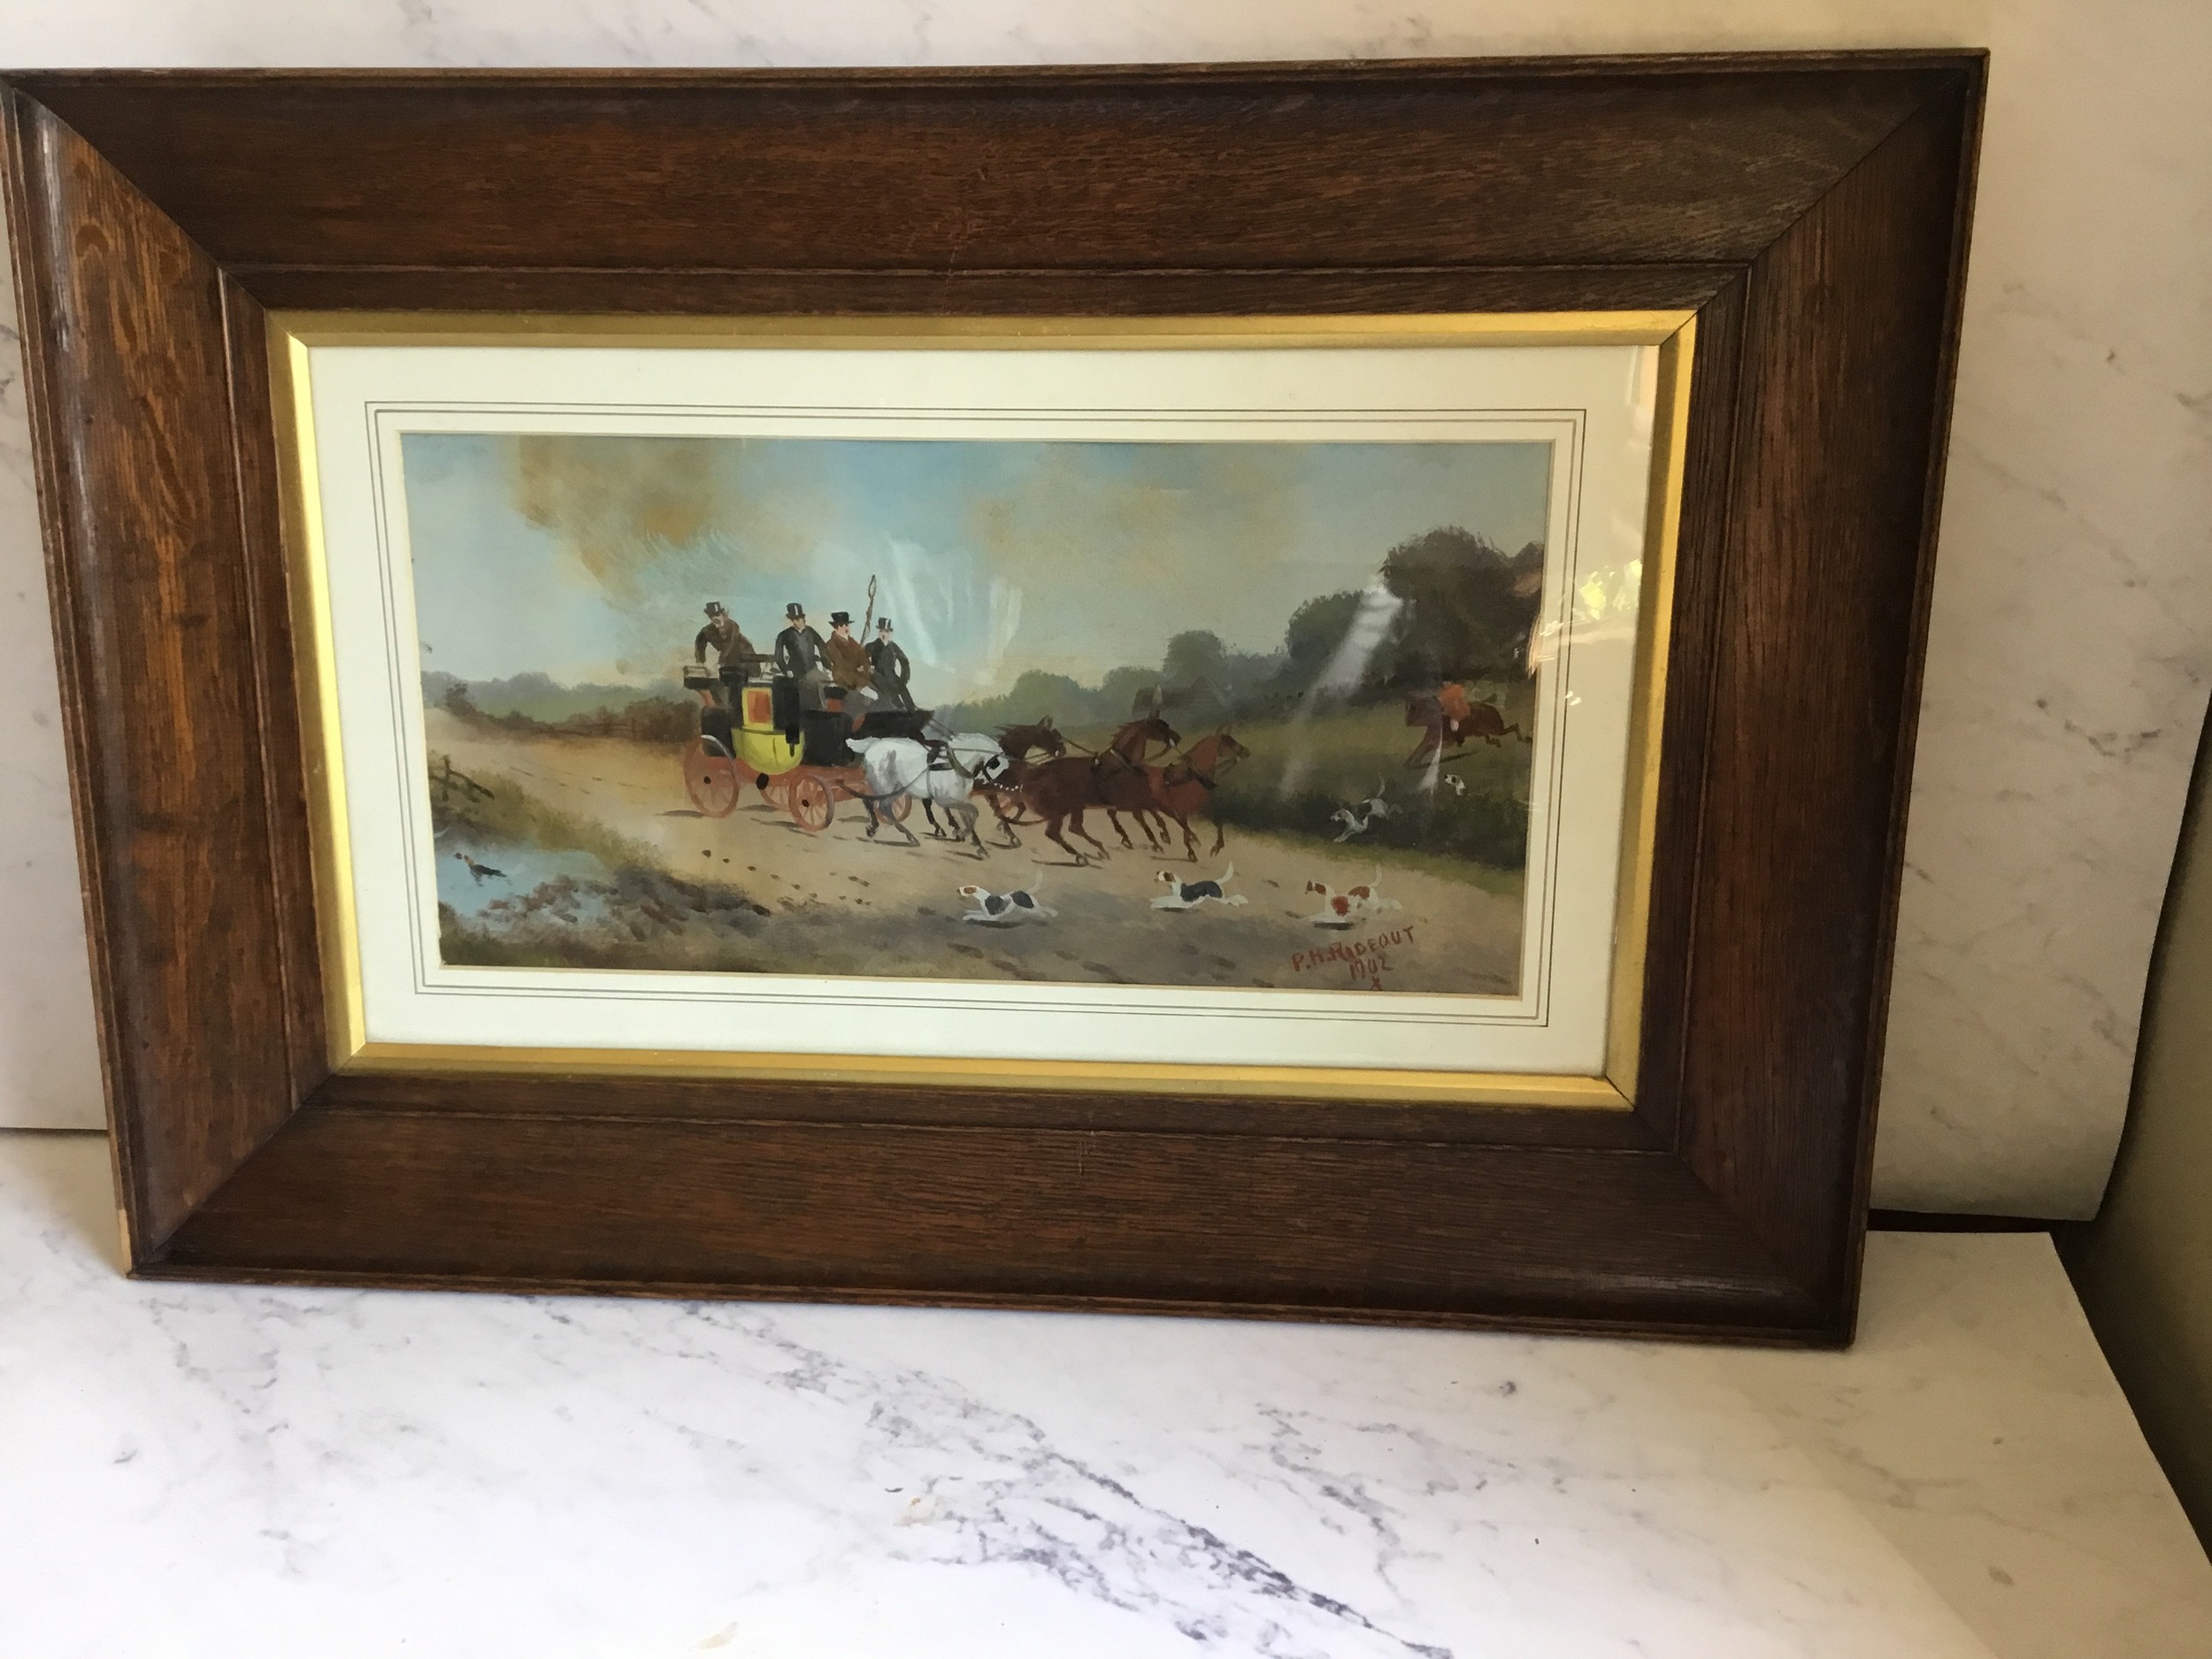 Philip H. Rideout, Coach and Four and Unstoppable hounds, signed, dated 1902, gouache, 19cm x 38.5cm